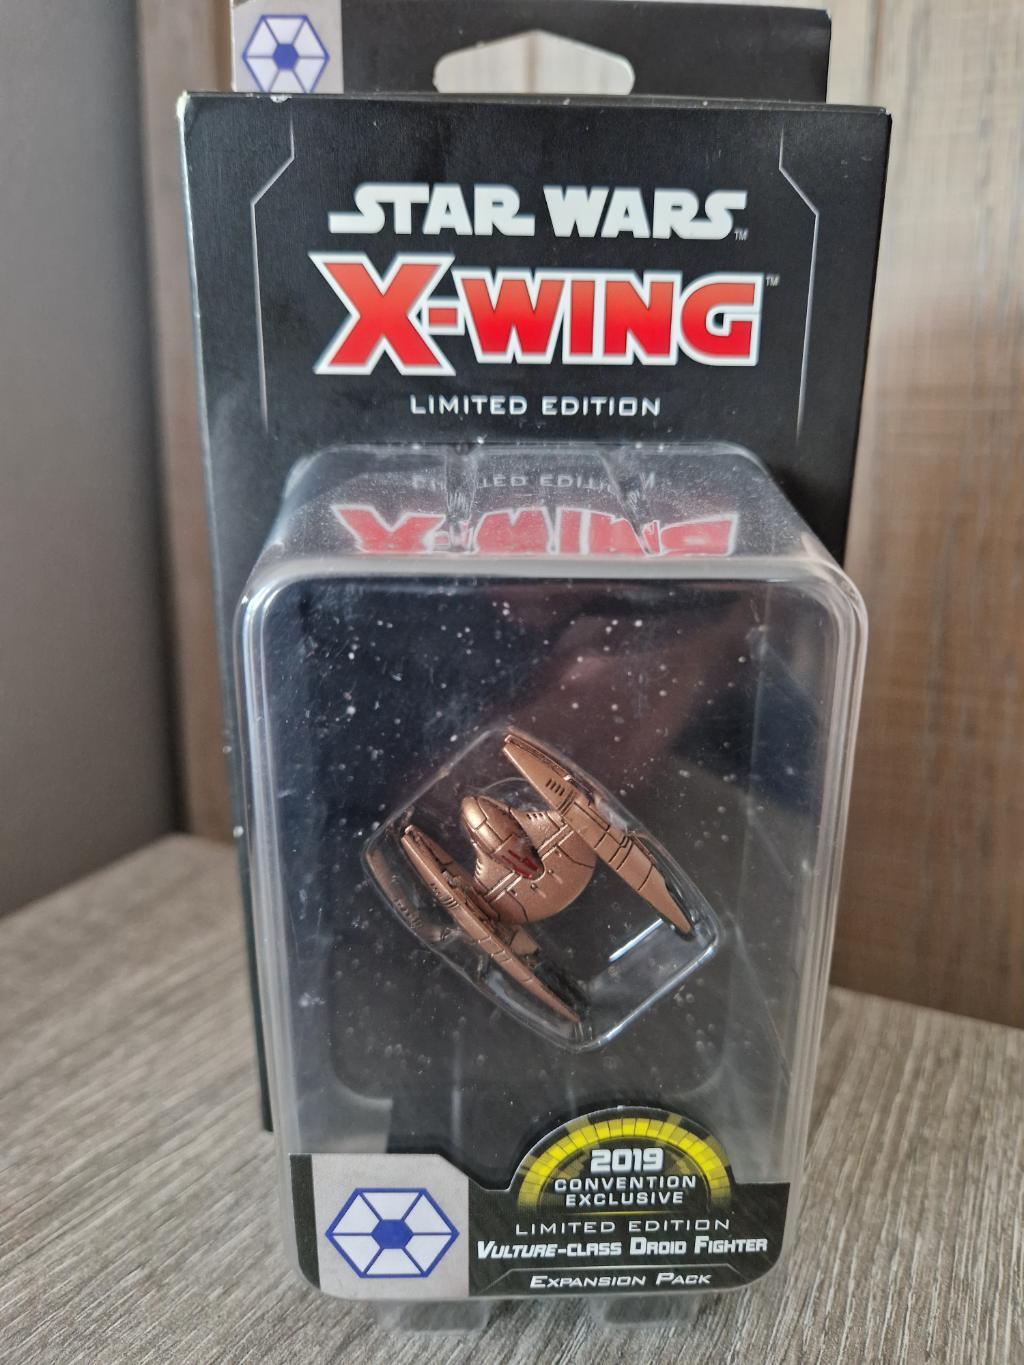 X-wing 2.0 - Le Jeu De Figurines - Vulture-class Droid Fighter - Limited Edition - 2019 Convention Exclusive